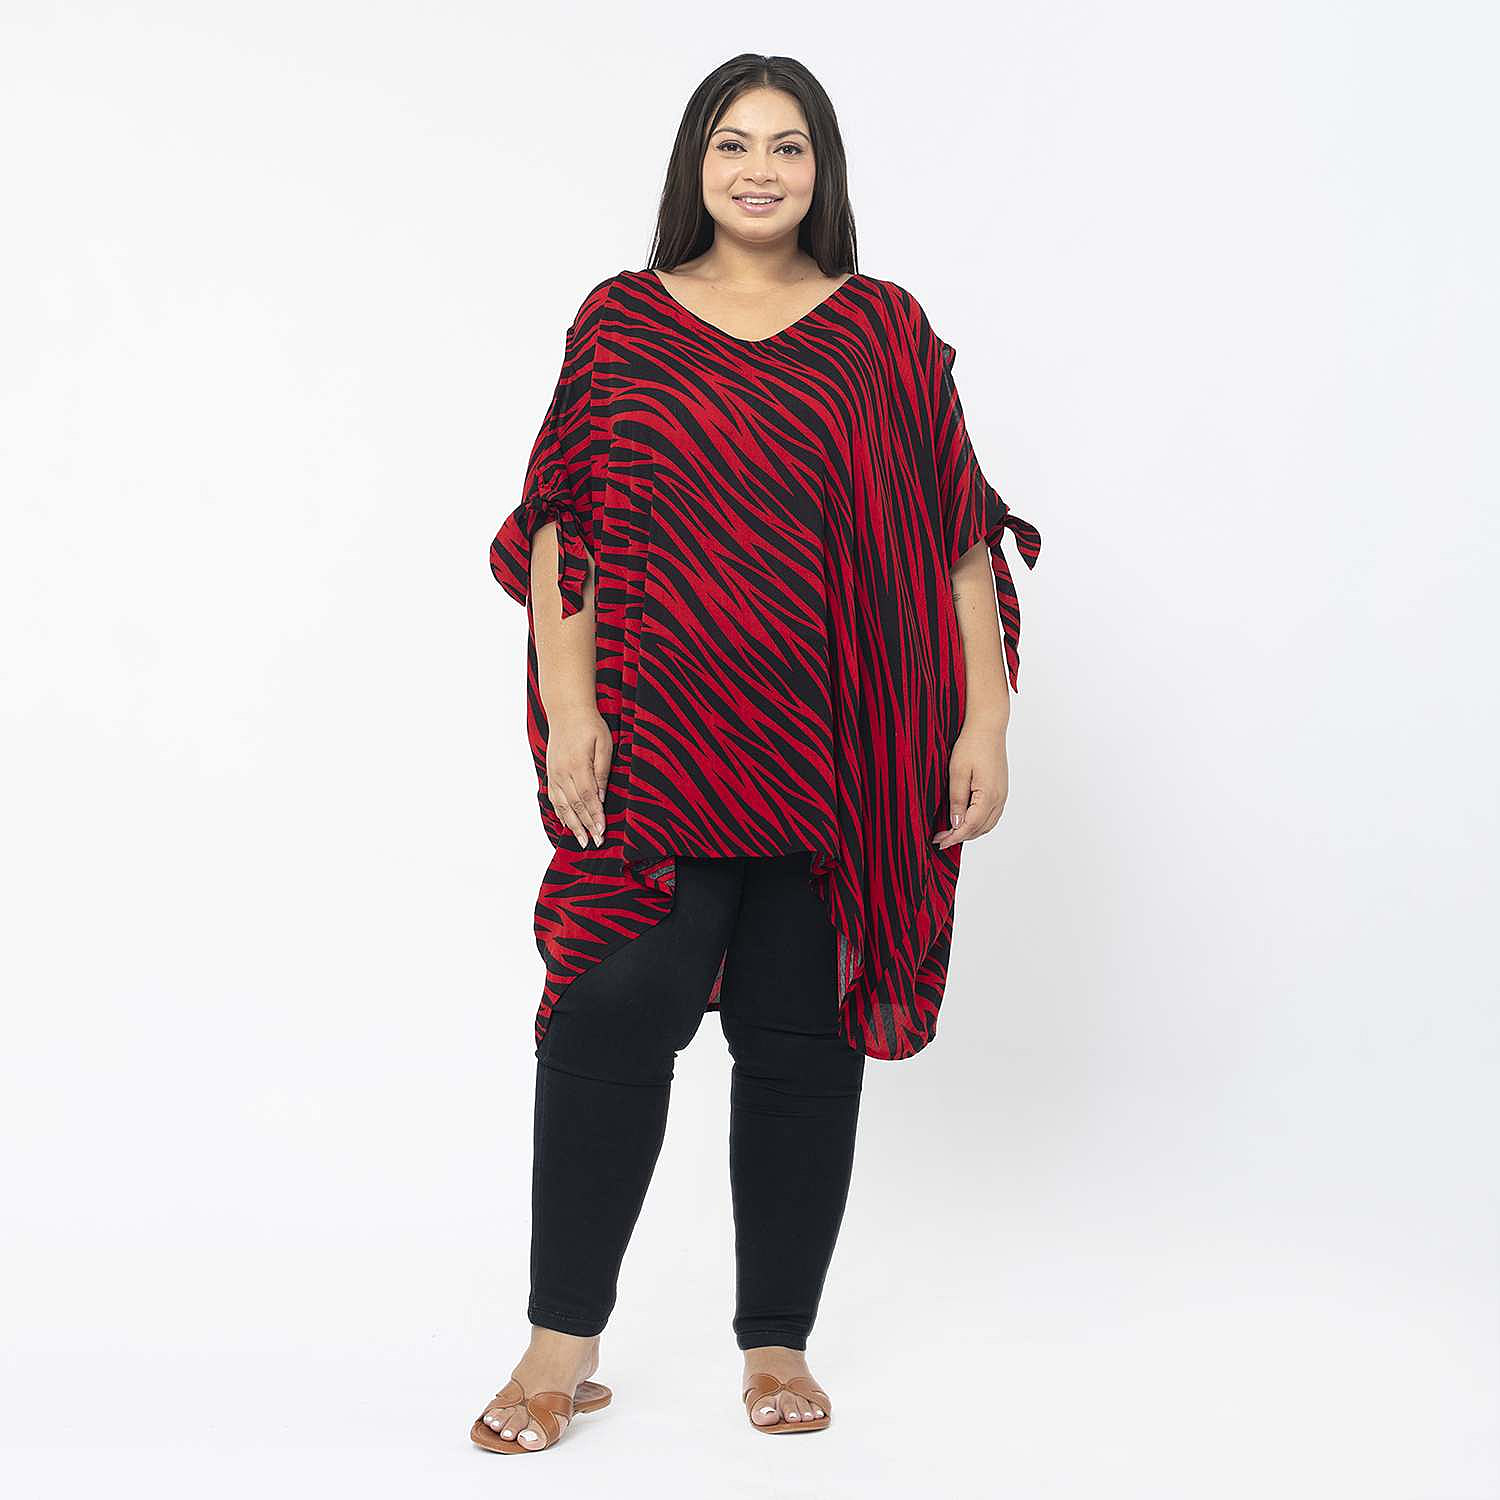 Tamsy-Viscose-Printed-Top-Size-99x1-cm-Red-Black